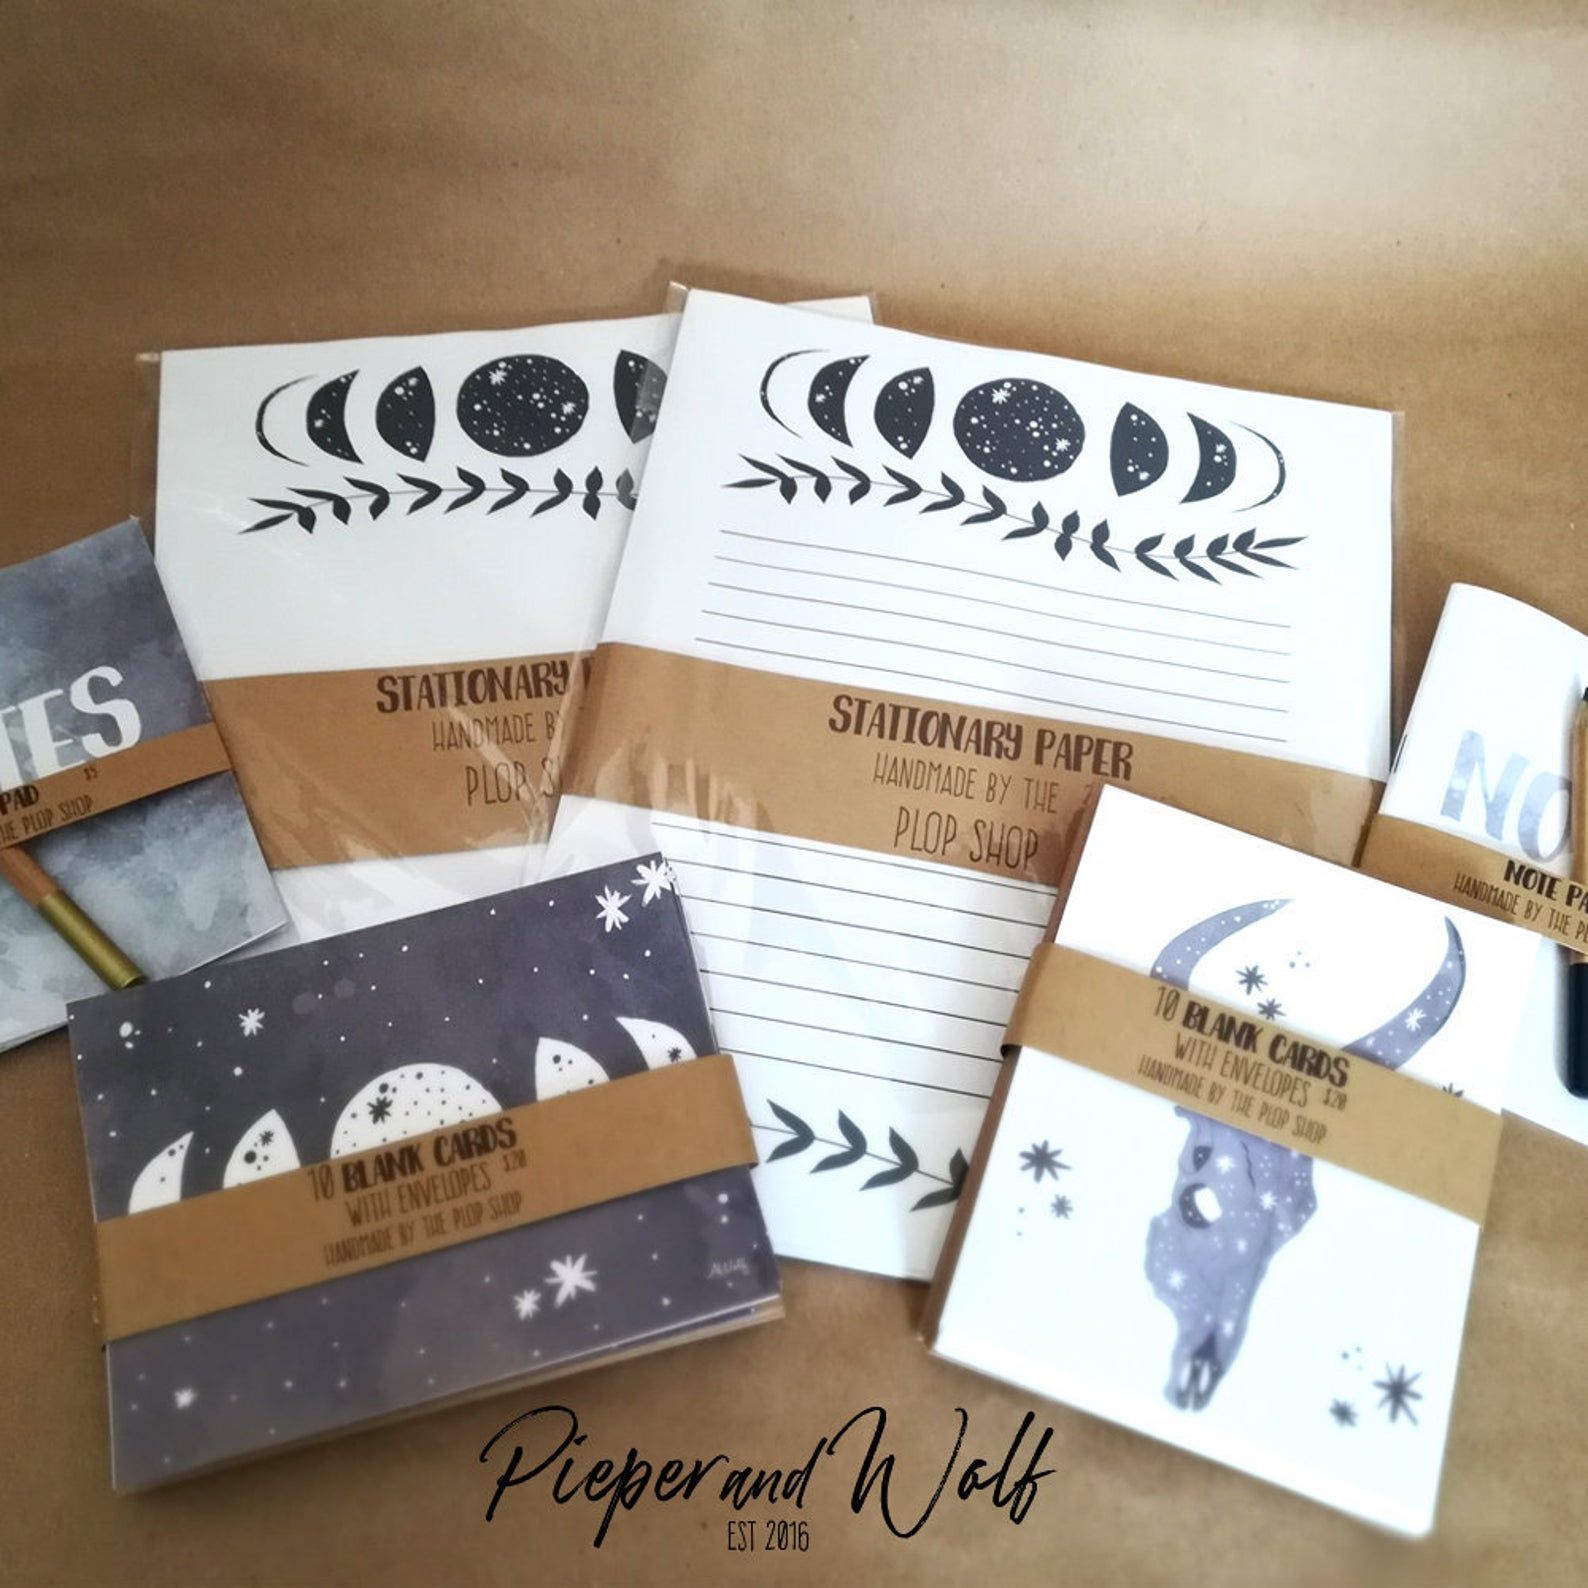 Cards and paper featuring moon phases and desert skulls.